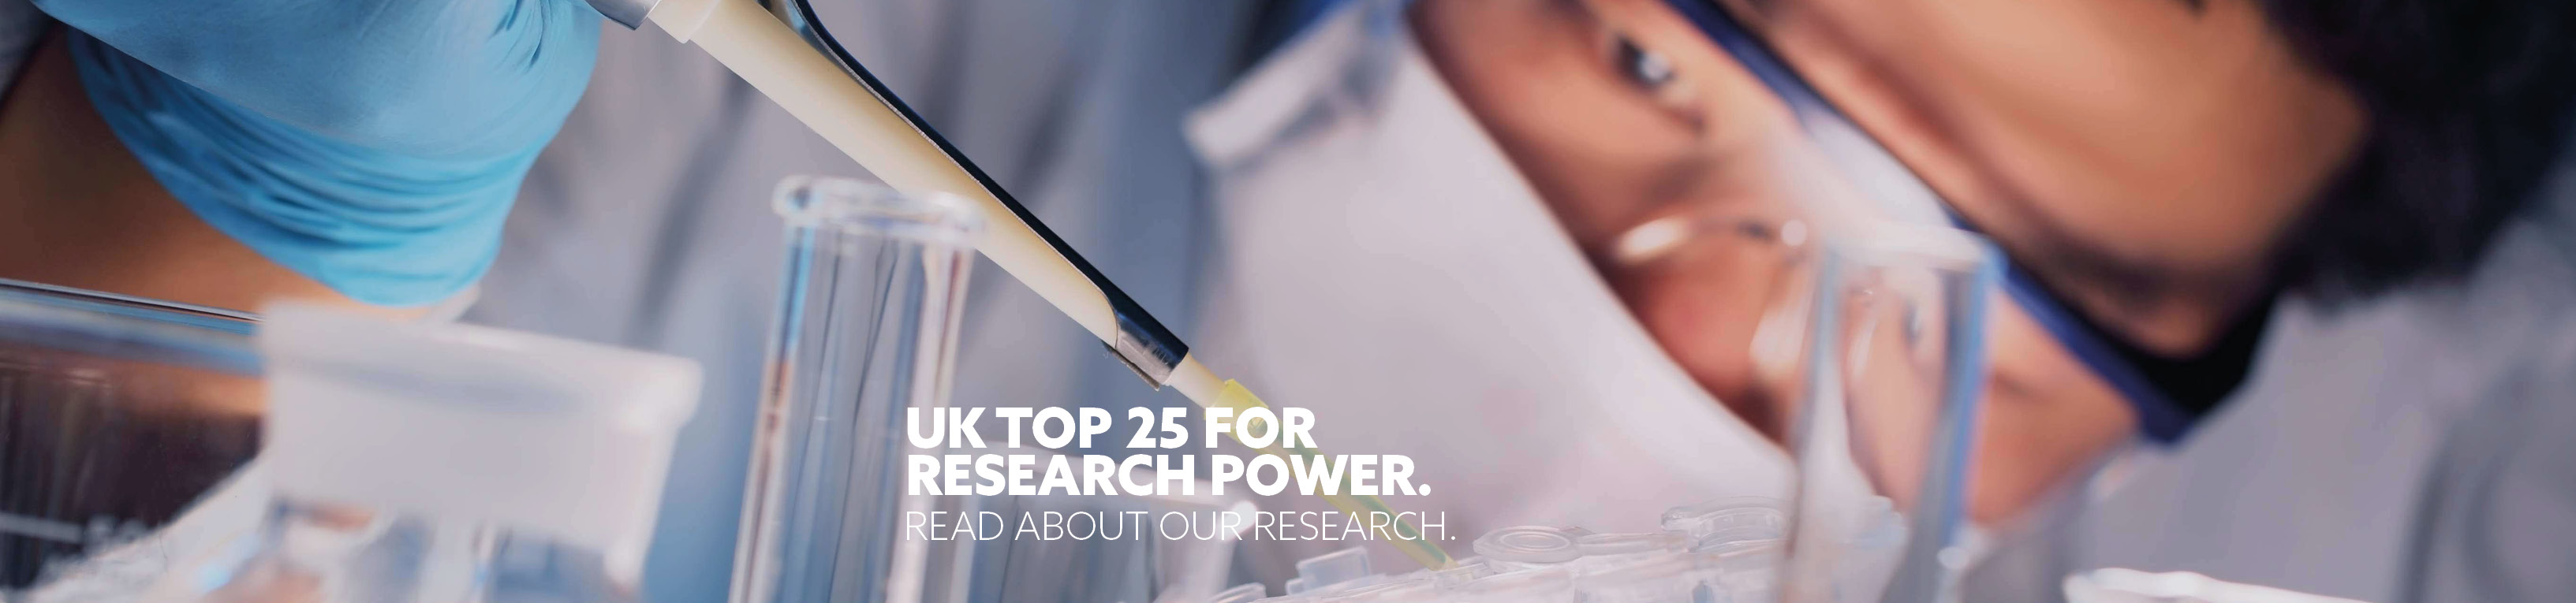 UK top 25 for research power 